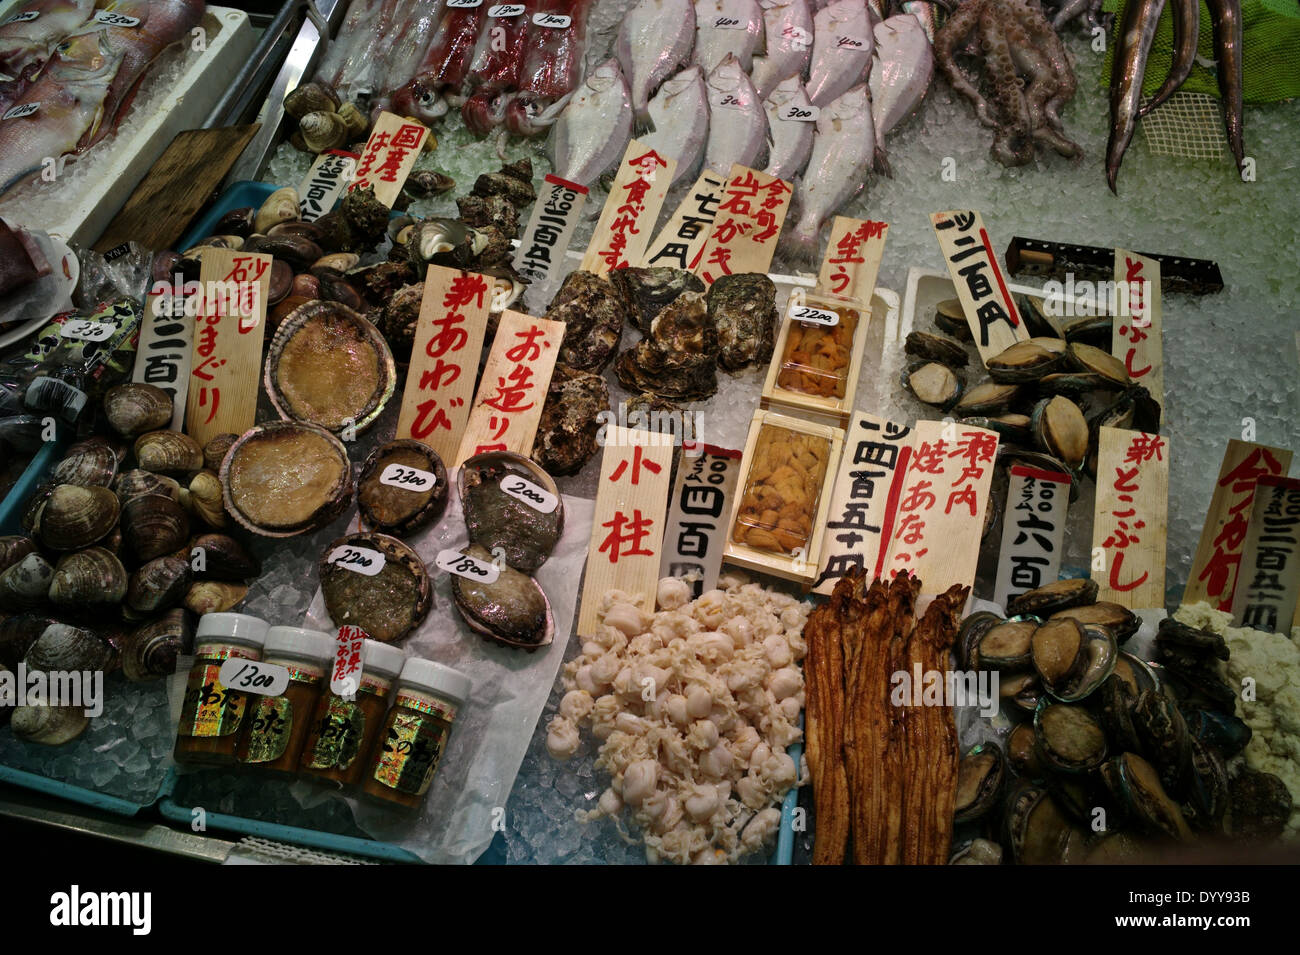 Dry products and fish at the Nishiki Market. Stock Photo